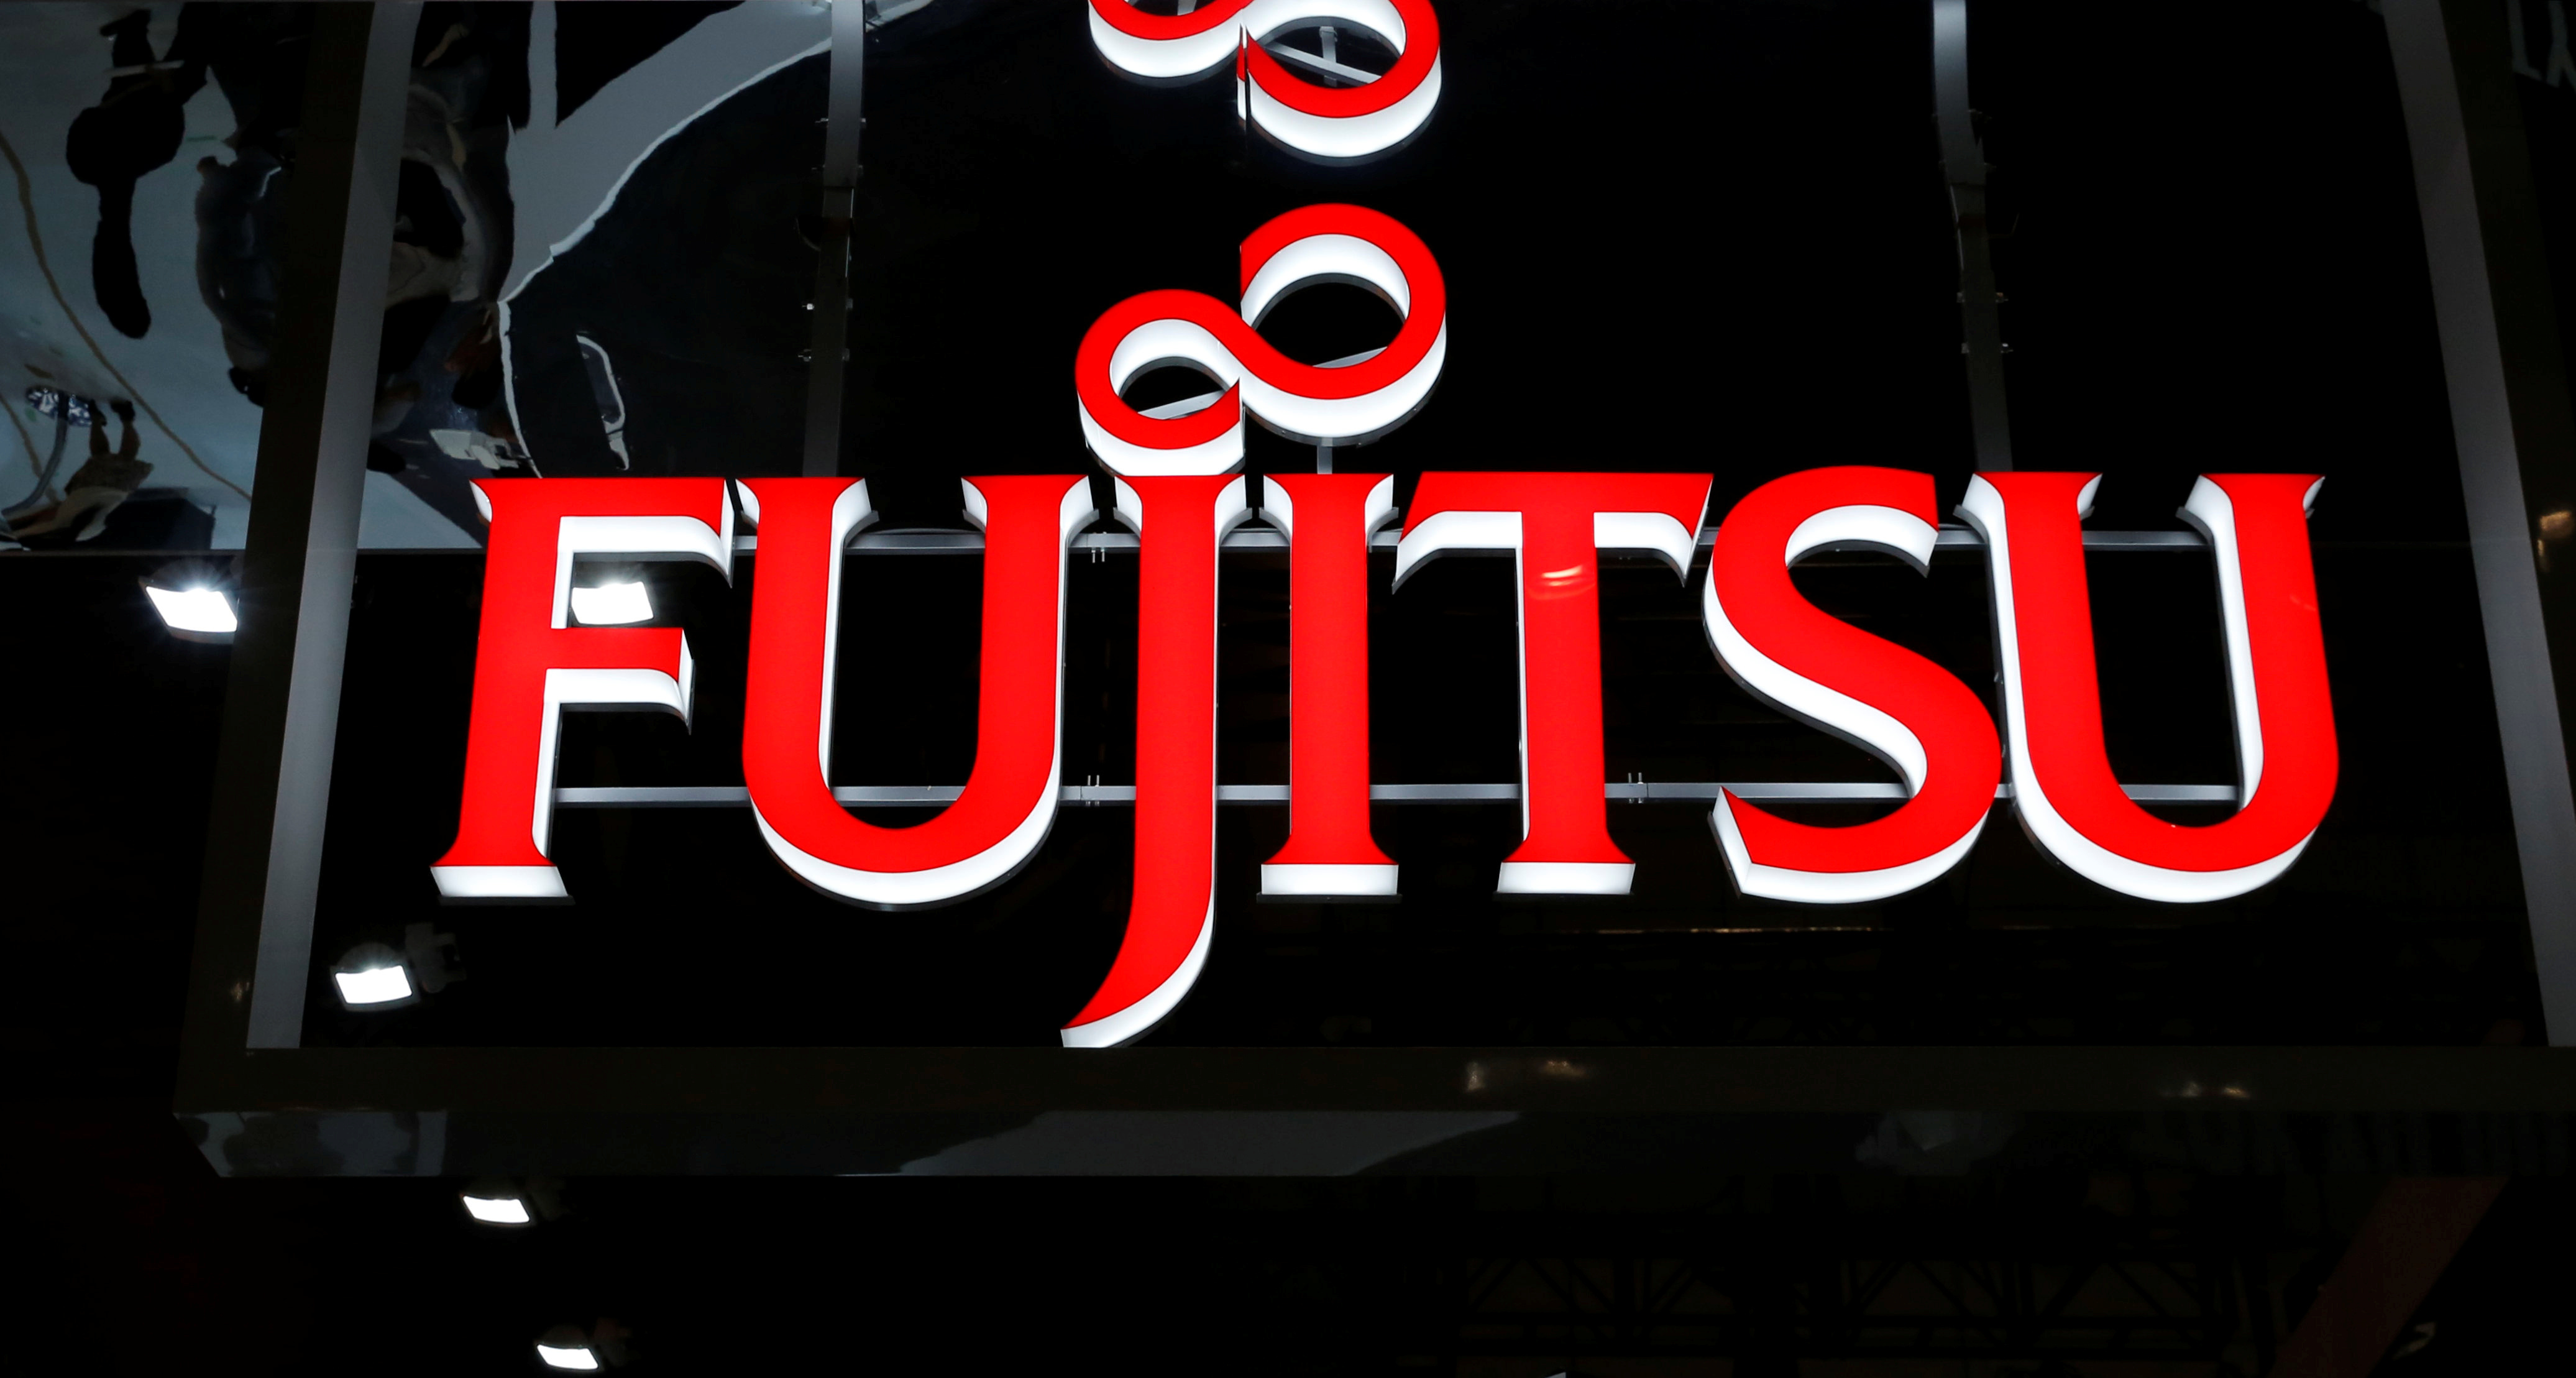 Fujitsu kicks off auction for air conditioning business - sources | Reuters